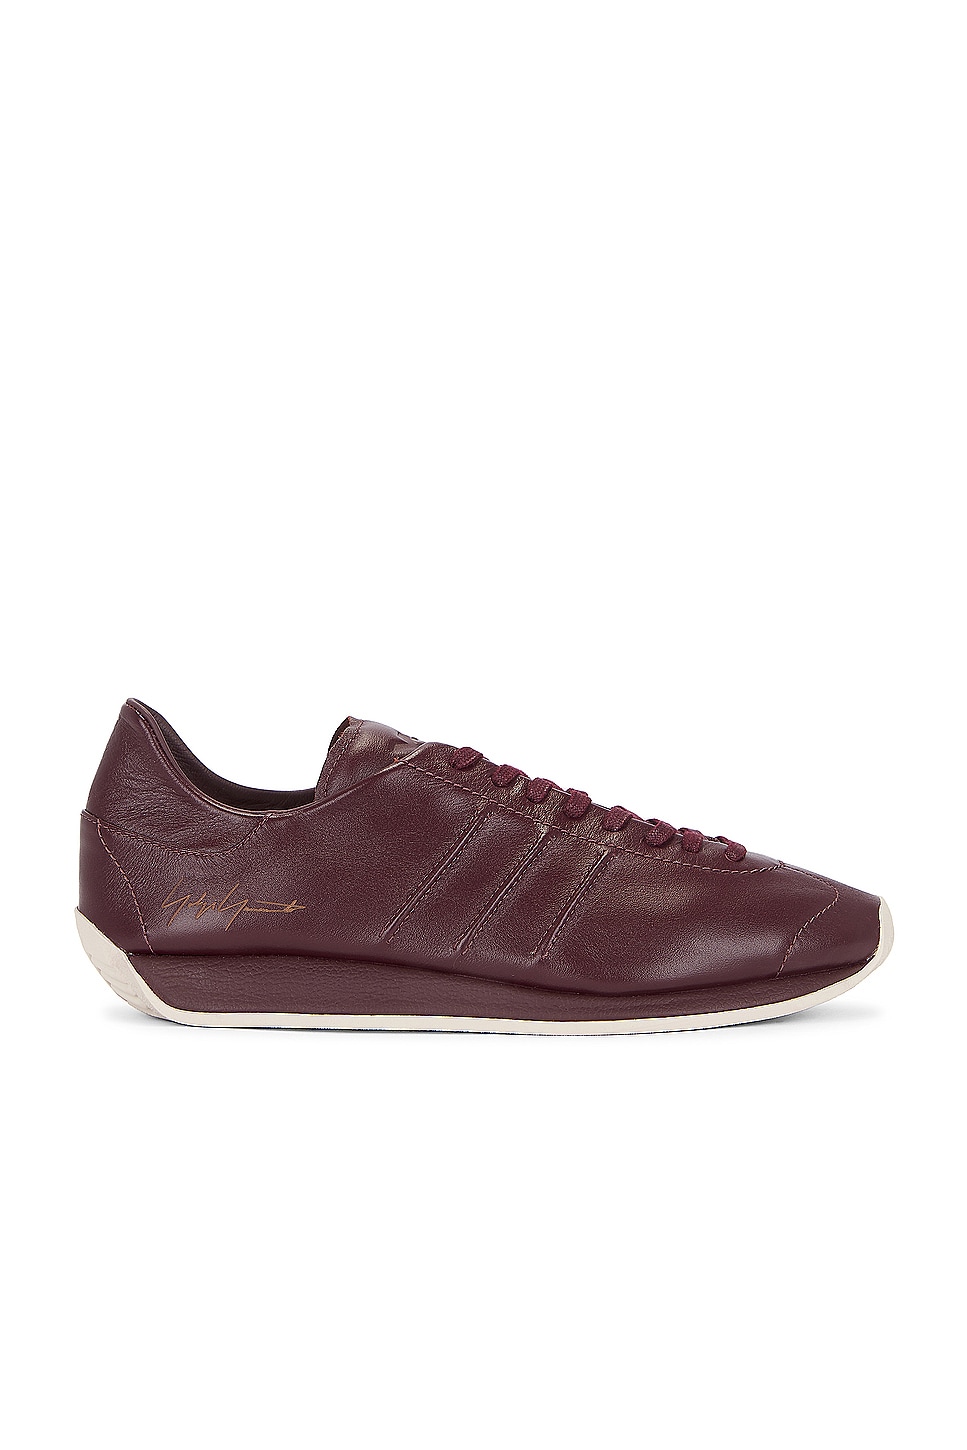 Image 1 of Y-3 Yohji Yamamoto Country in Shadow Red & Clear Brown